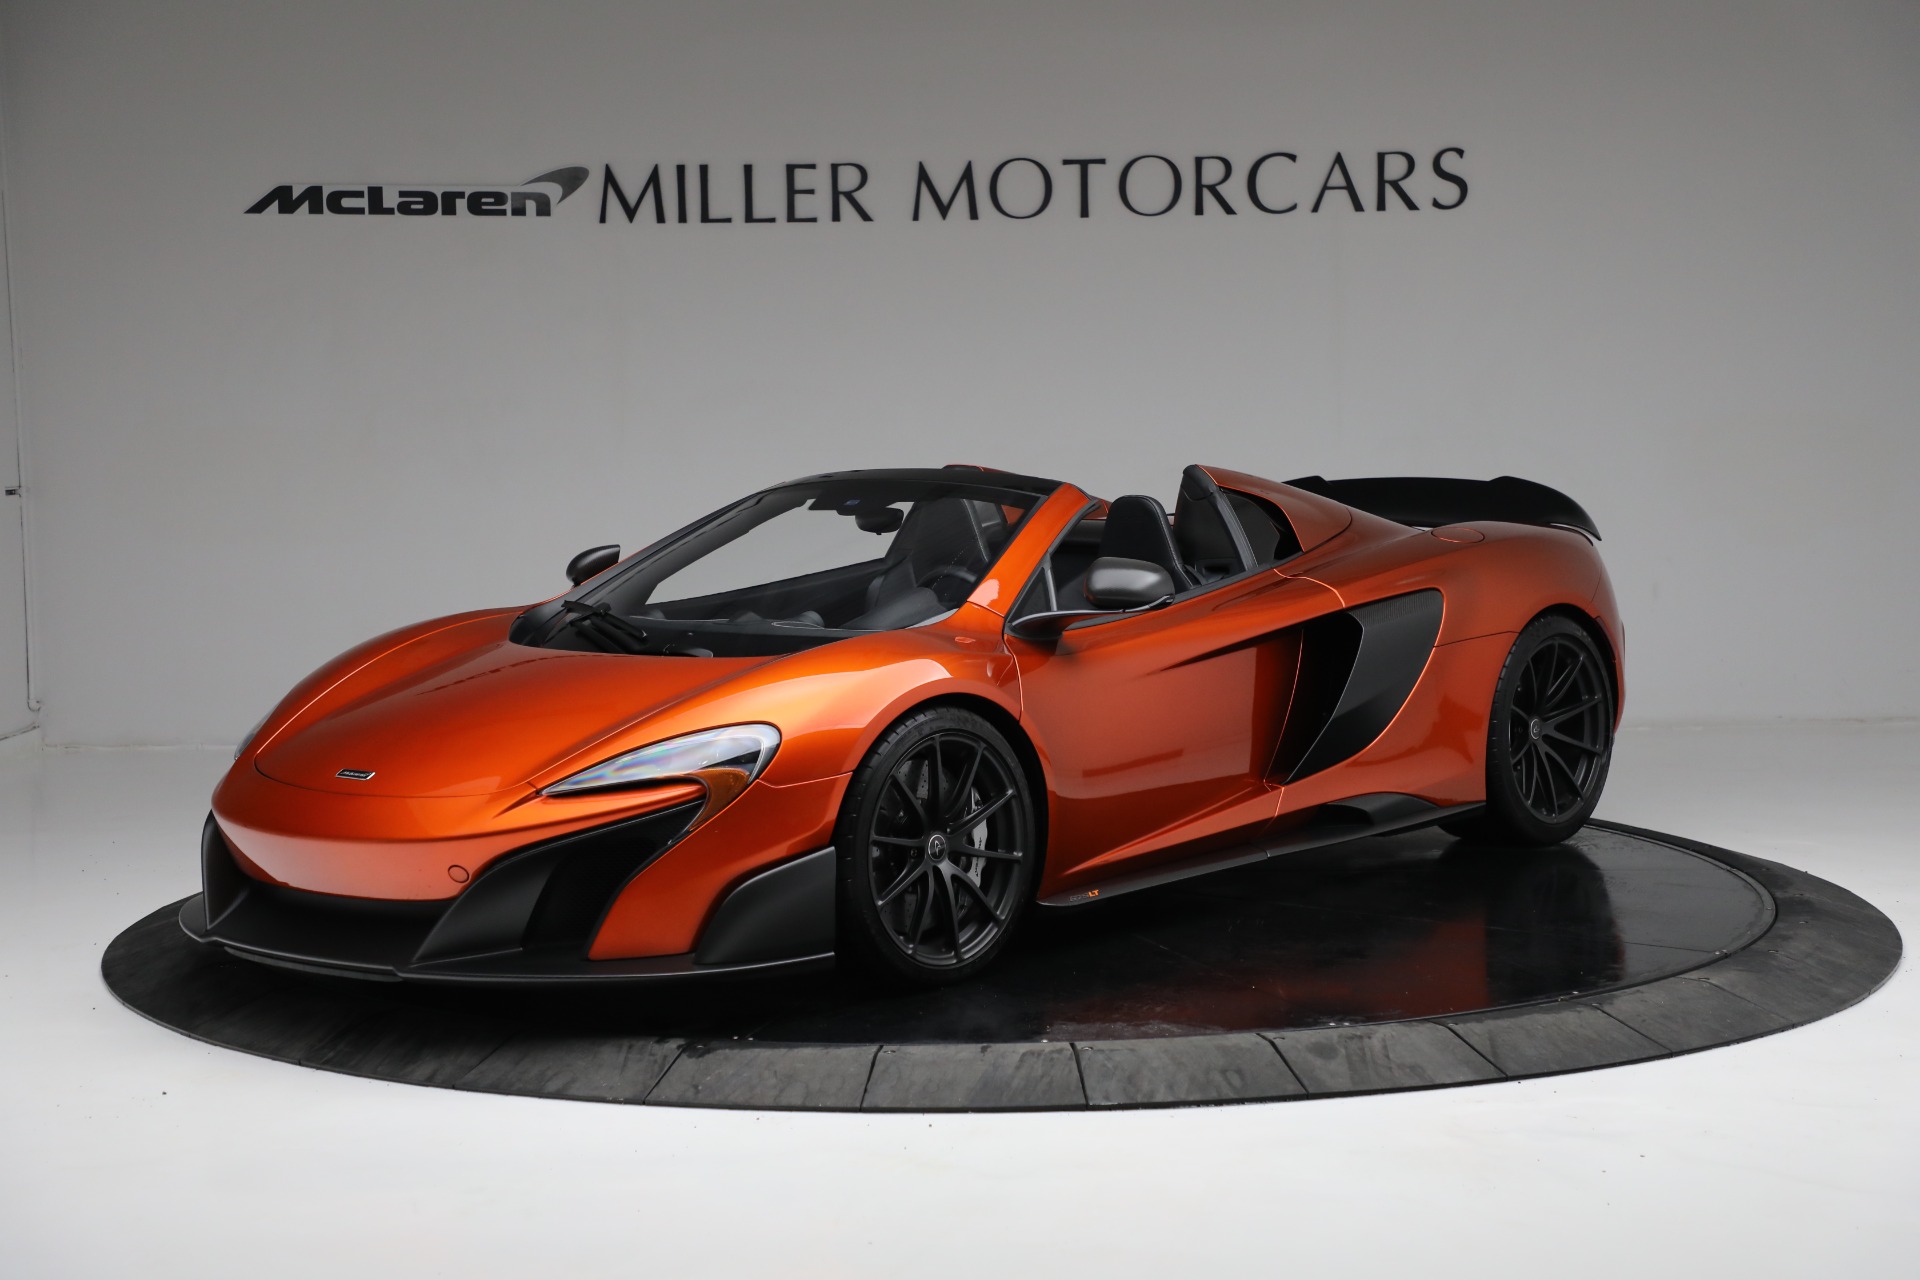 Used 2016 McLaren 675LT Spider for sale $299,900 at Rolls-Royce Motor Cars Greenwich in Greenwich CT 06830 1